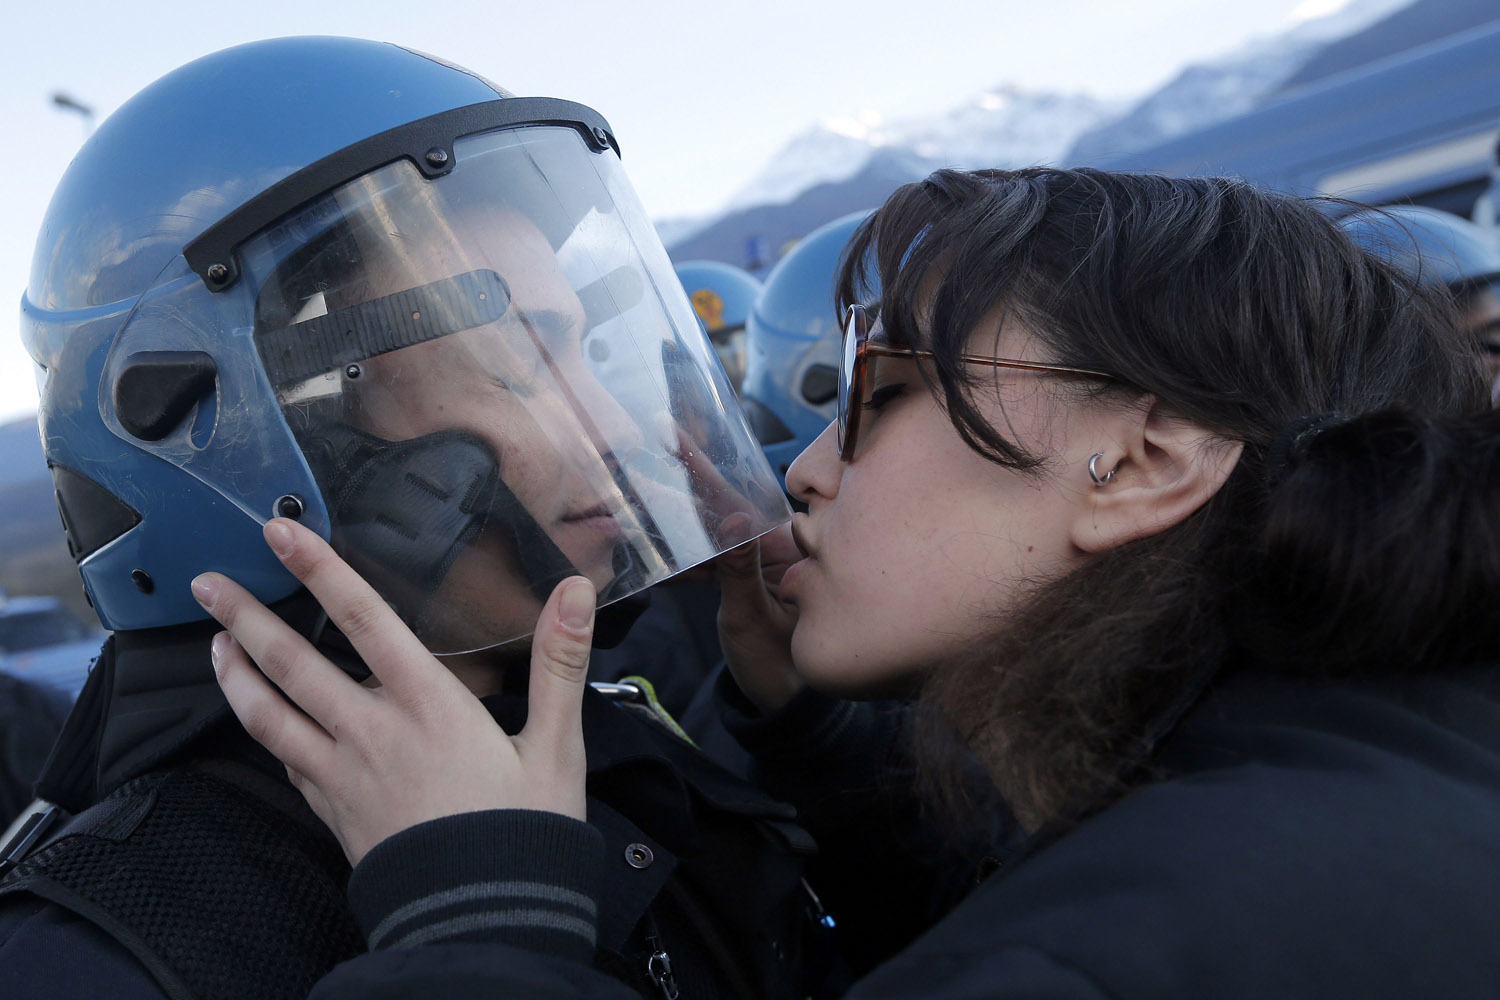 Nov. 16, 2013. A demonstrator kisses a riot police officer during a protest in Susa, Italy against the high-speed train (TAV in Italian) line between Lyon and Turin.